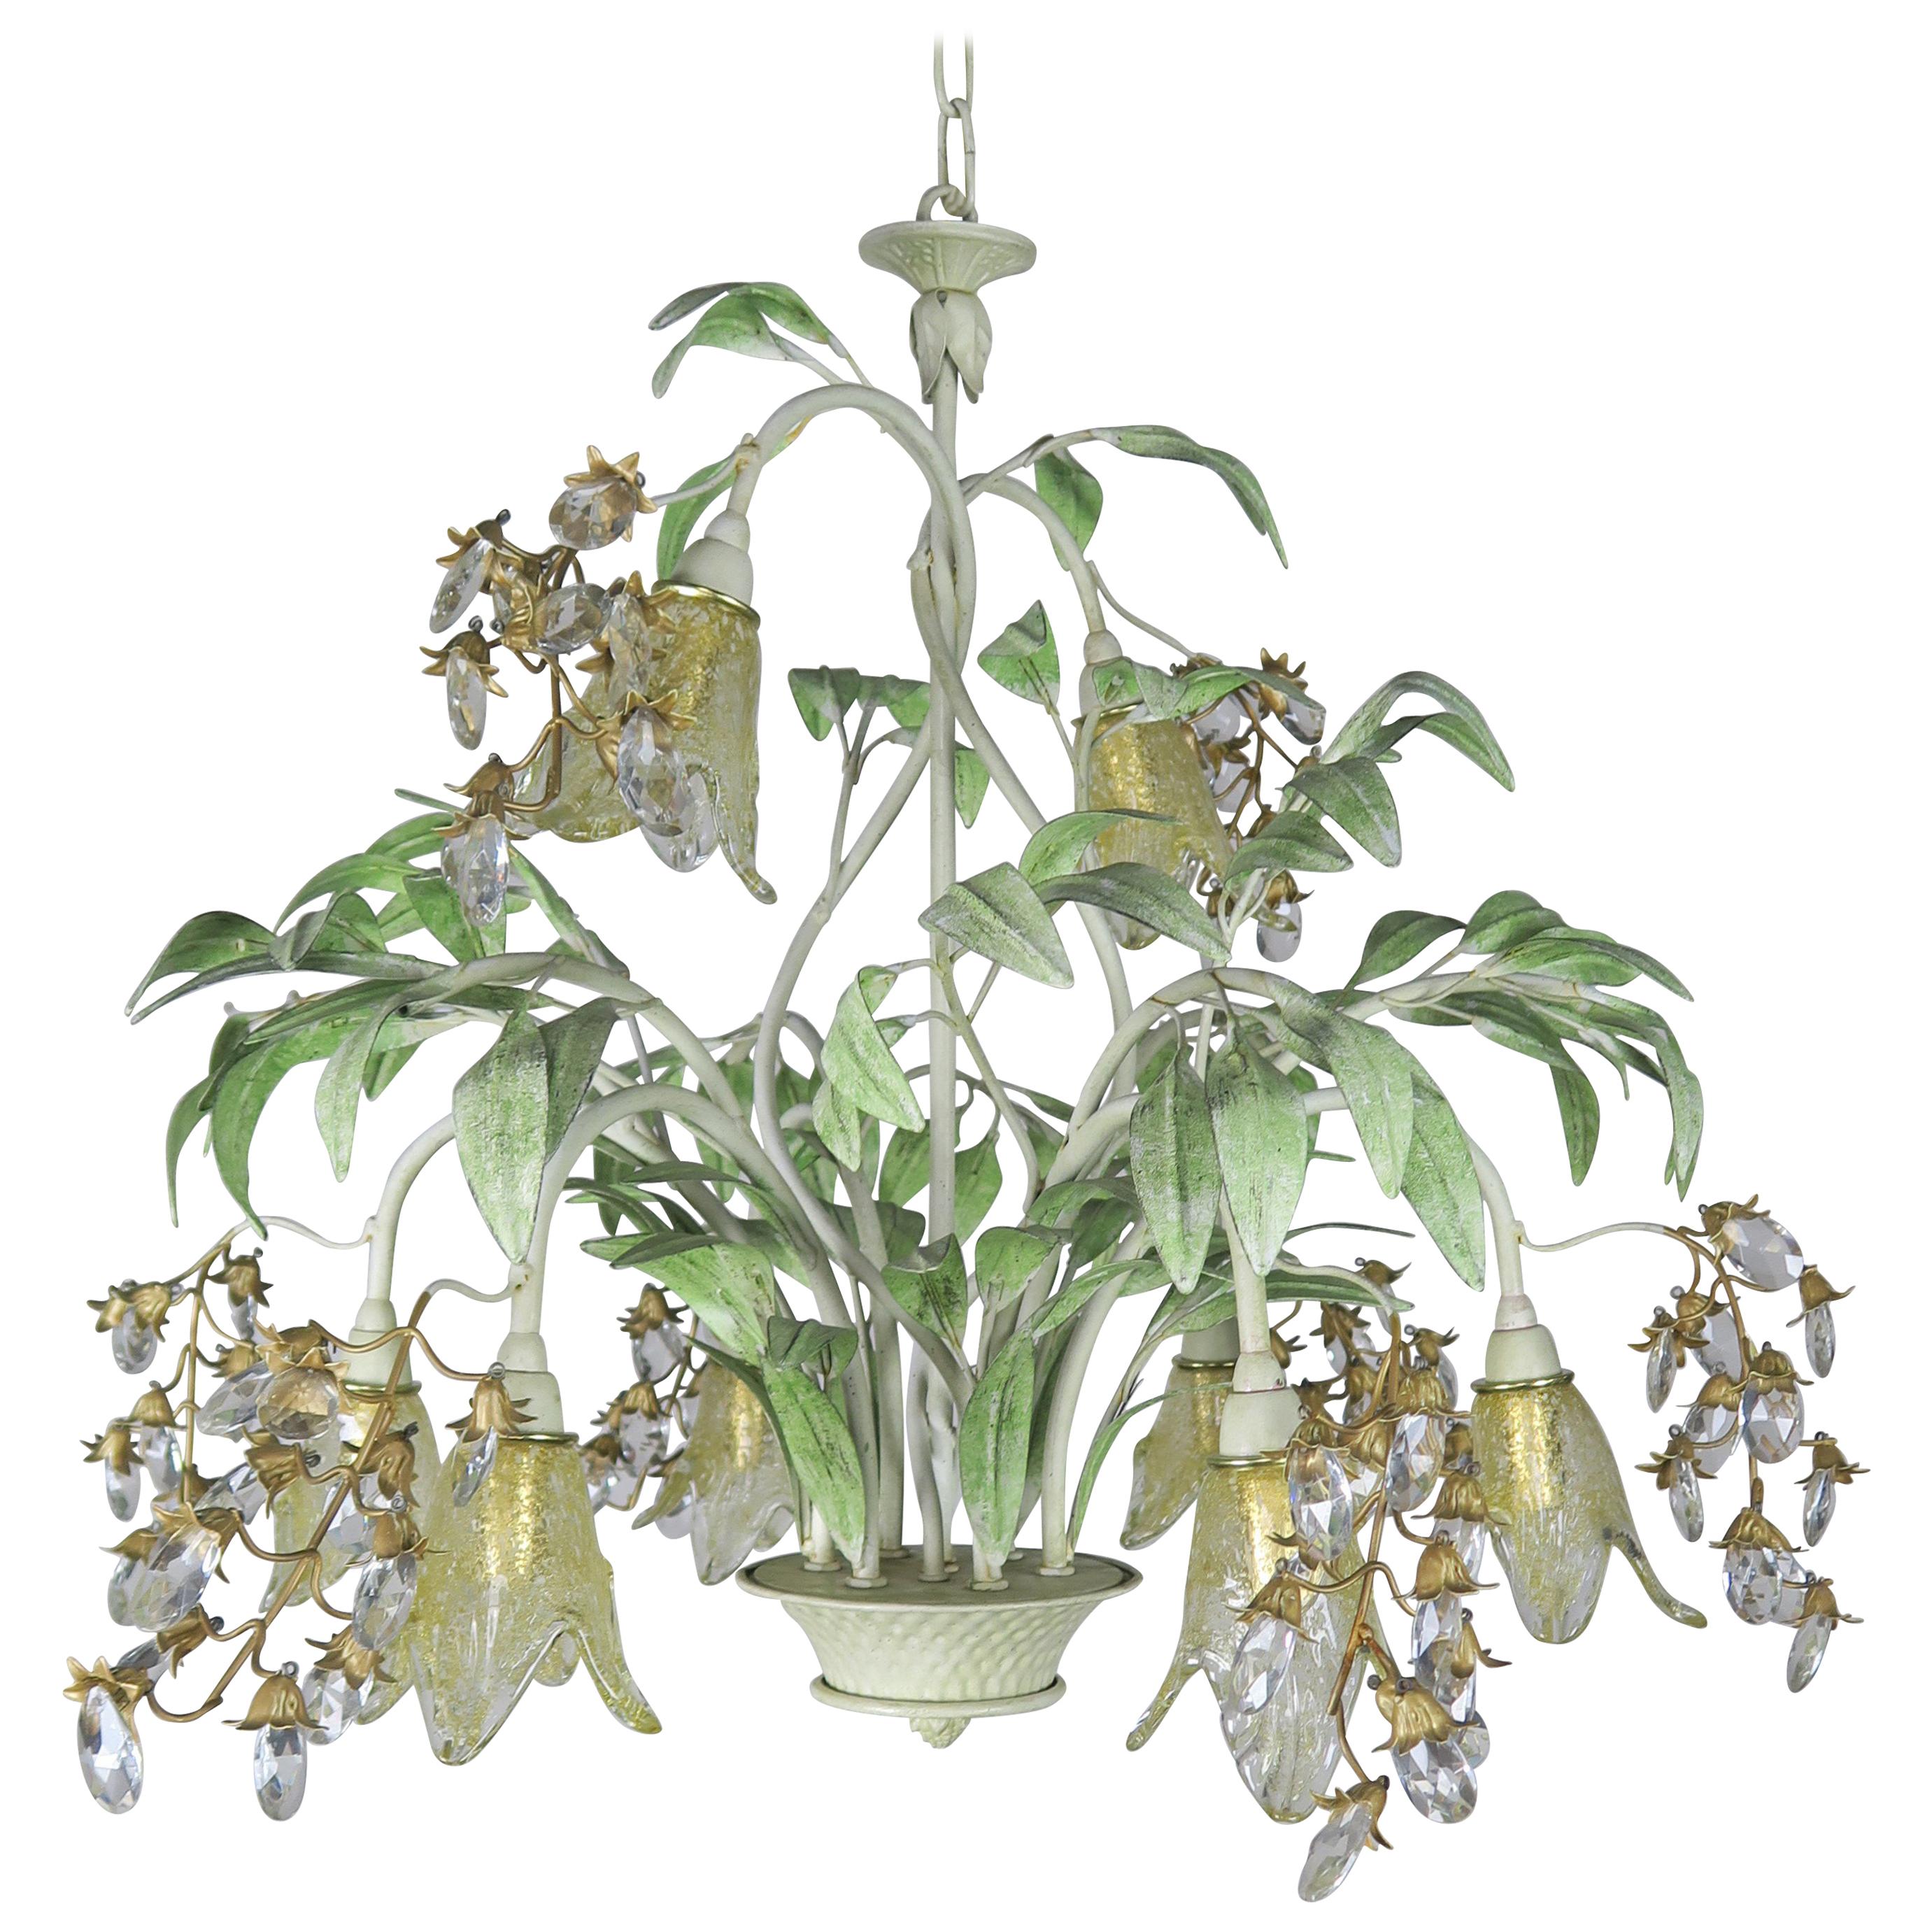 Painted Tole and Murano Glass Chandelier, circa 1930s